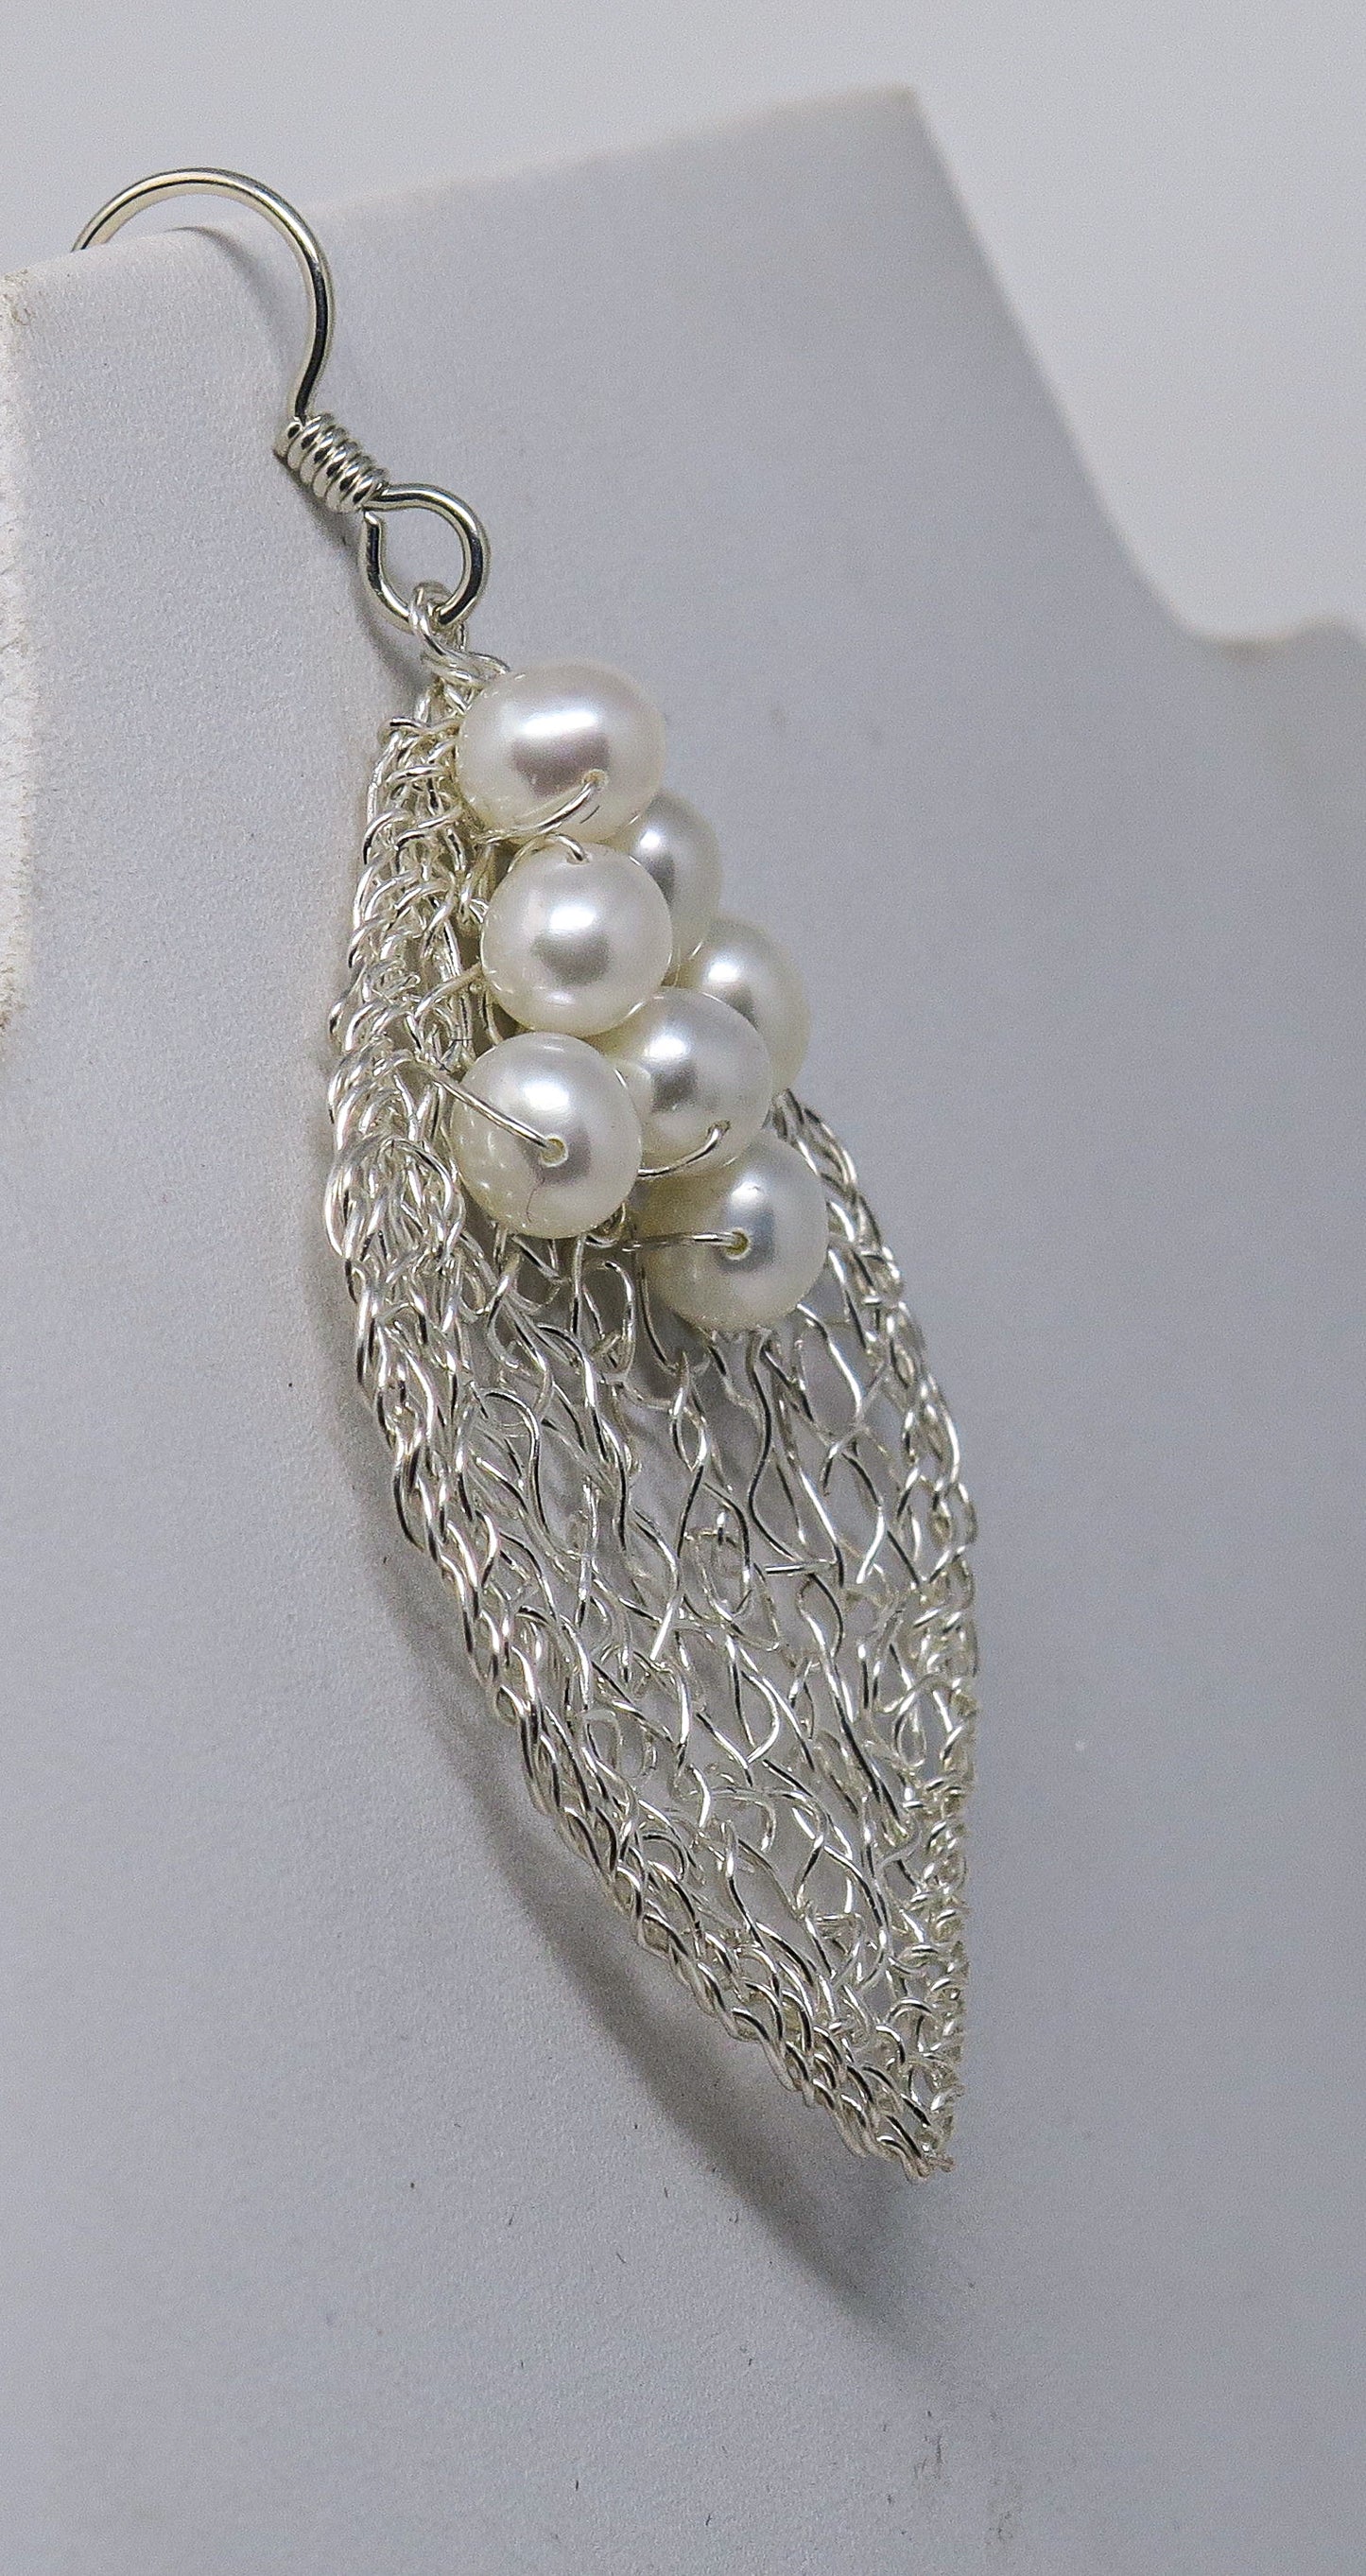 Silver Leaf-shaped Earrings with a White Pearl Cluster | by Kathryn Stanko